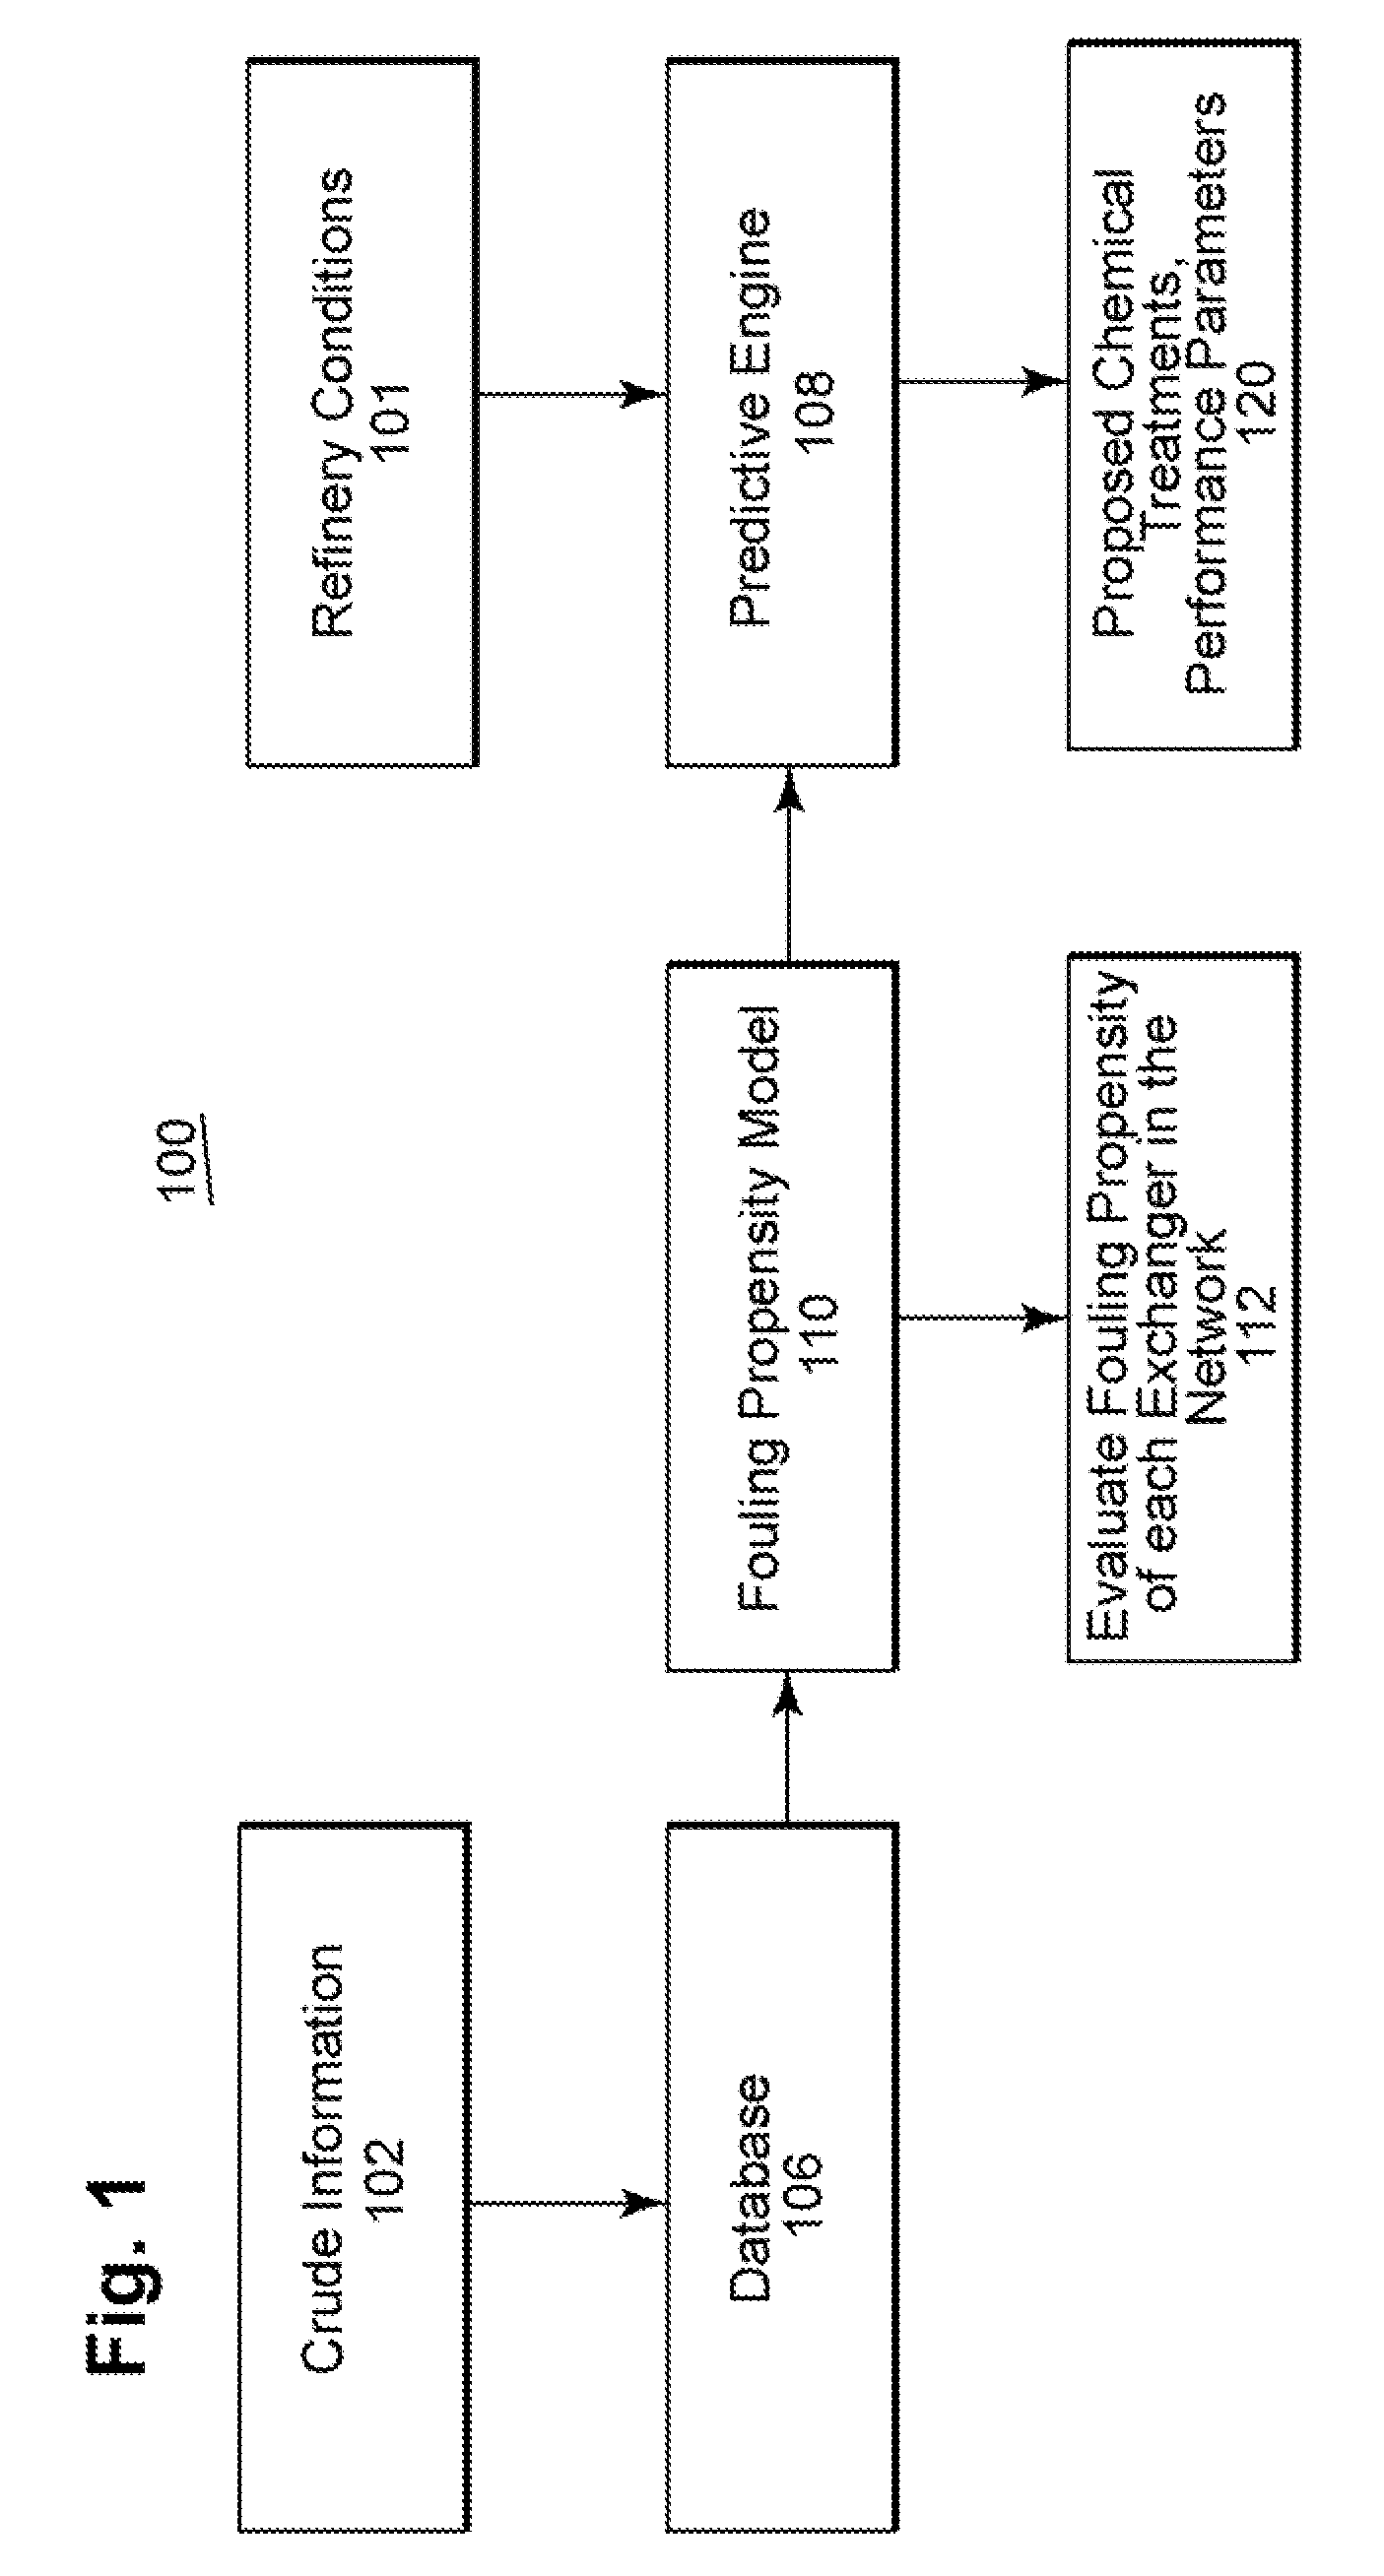 Method and system for assessing the performance of crude oils